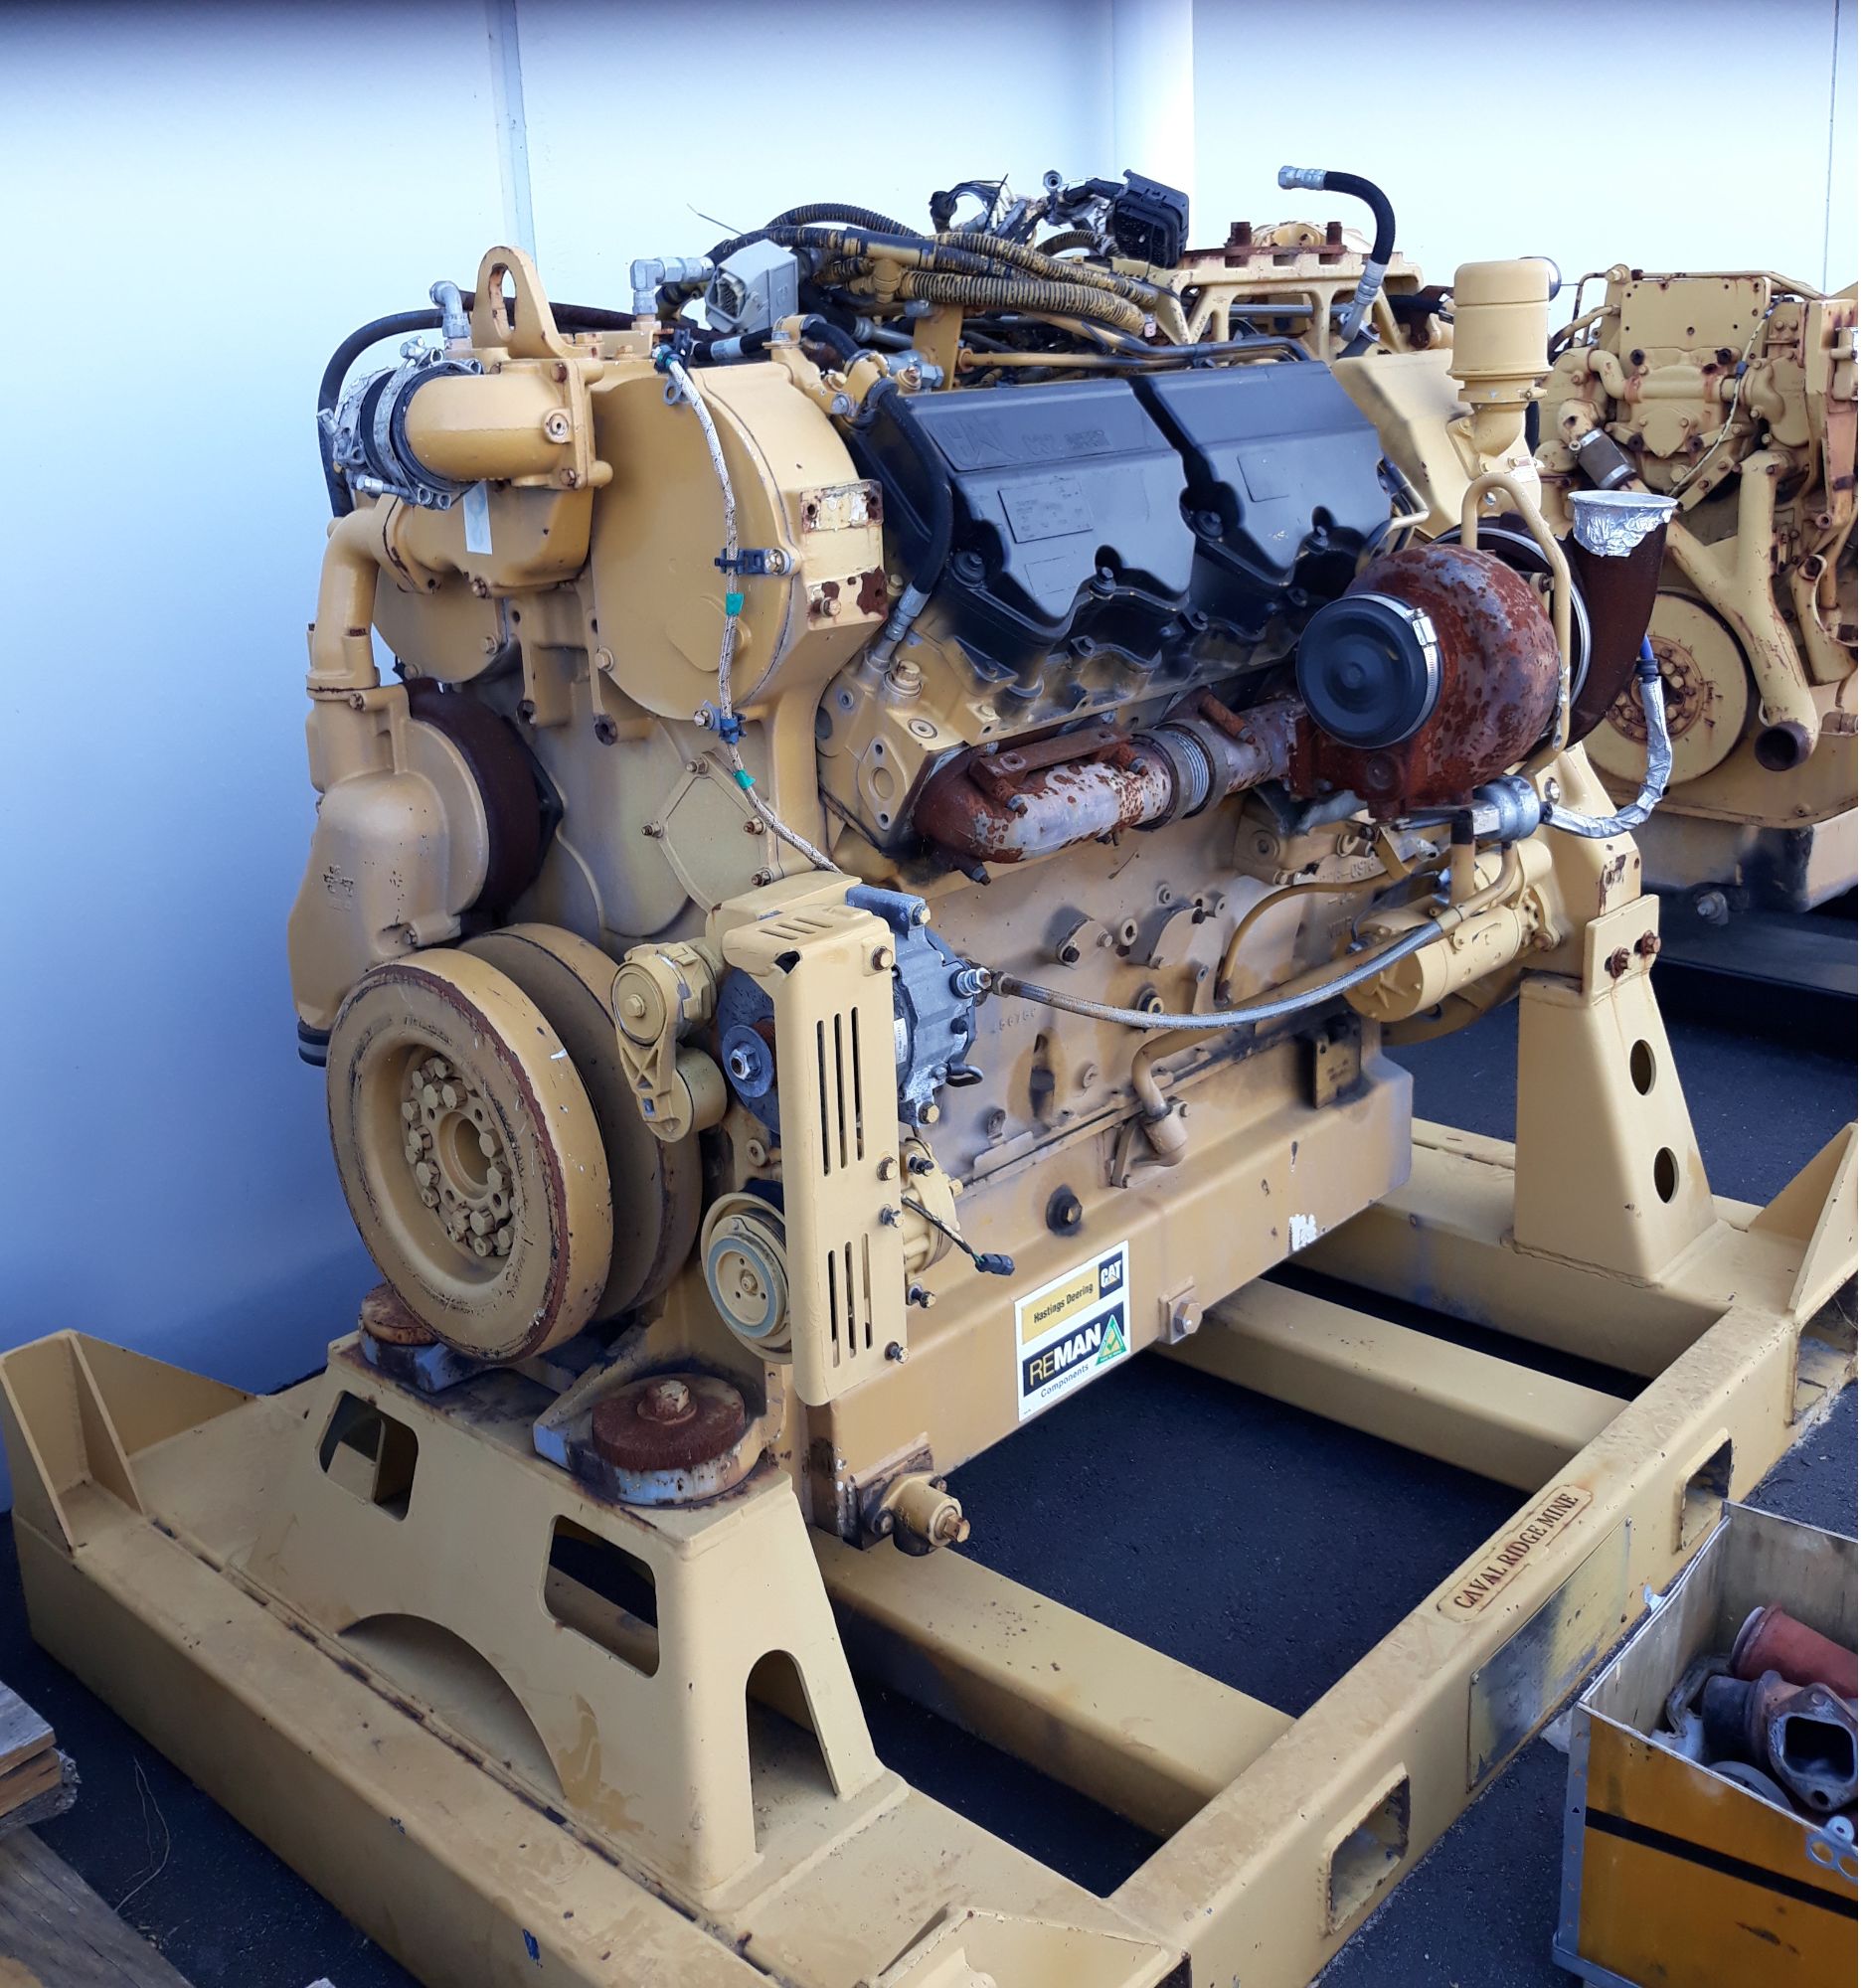 CaterpillarÂ® C32 Industrial Engines dismantled and used parts now available for sale throughout Australia